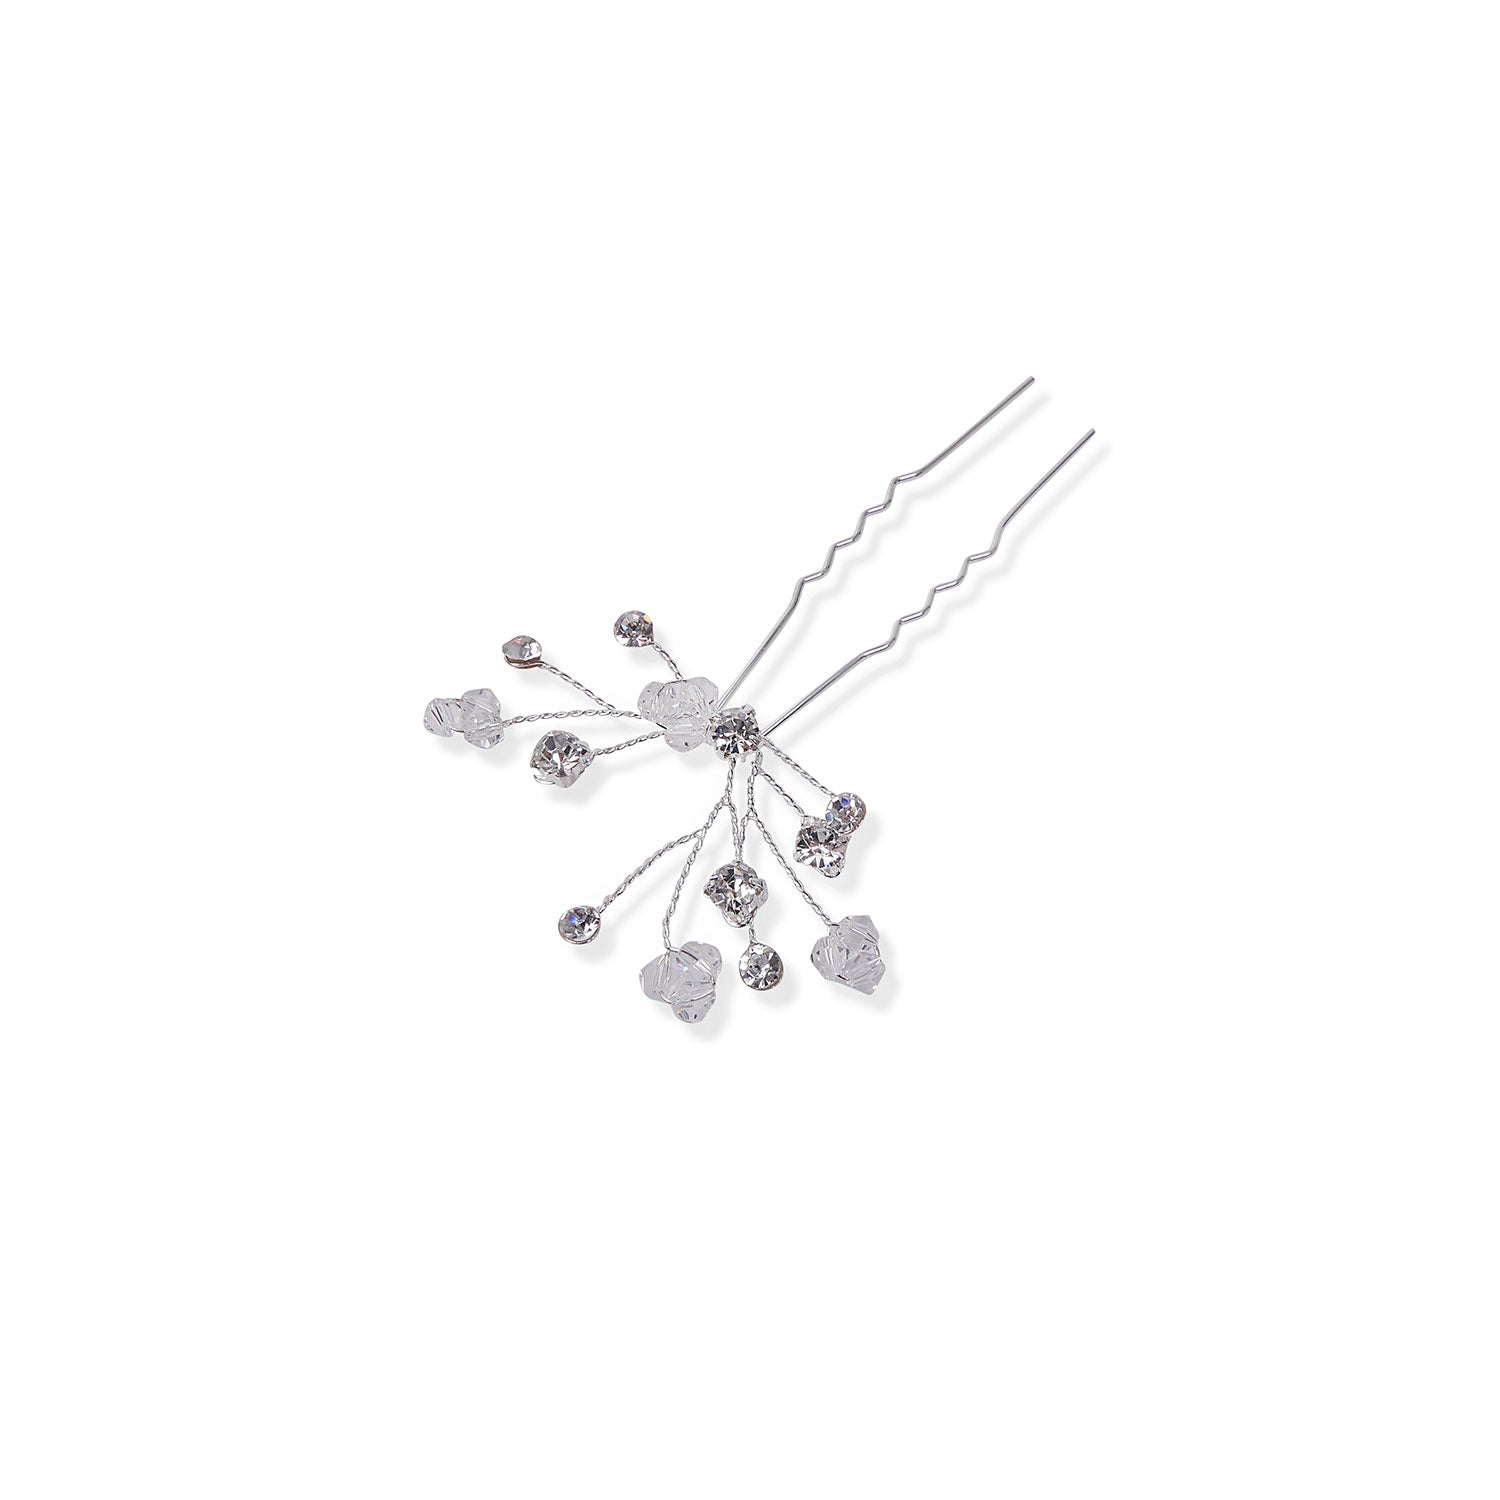 Scattered Crystal and Bead Hair Pin